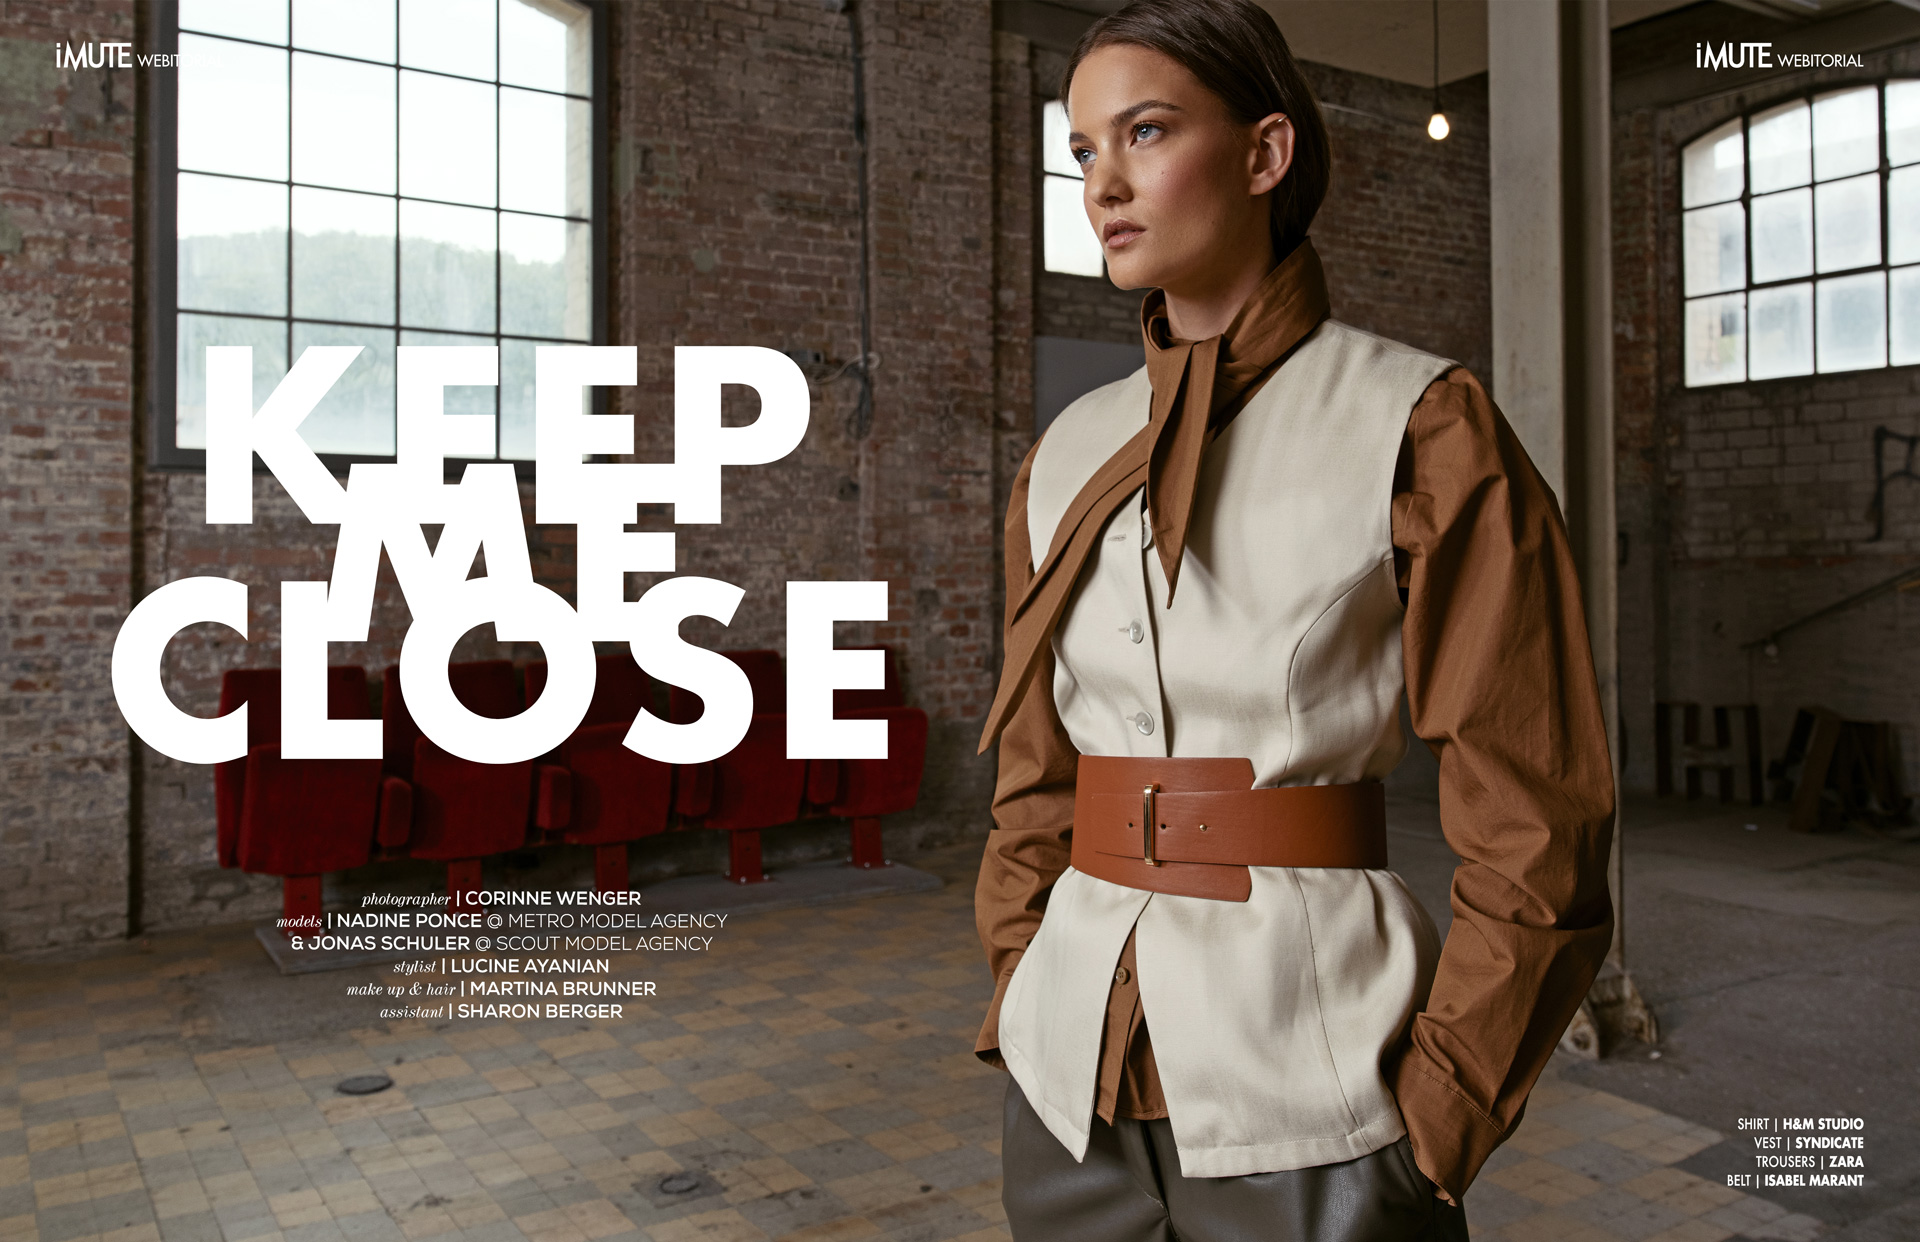 KEEP ME CLOSE webitorial for iMute Magazine  PHOTOGRAPHER | CORINNE WENGER STYLIST | LUCINE AYANIAN MODELS | NADINE PONCE @ METRO MODEL AGENCY & JONAS SCHULER @ SCOUT MODEL AGENCY MAKEUP & HAIR | MARTINA BRUNNER ASSISTANT | SHARON BERGER